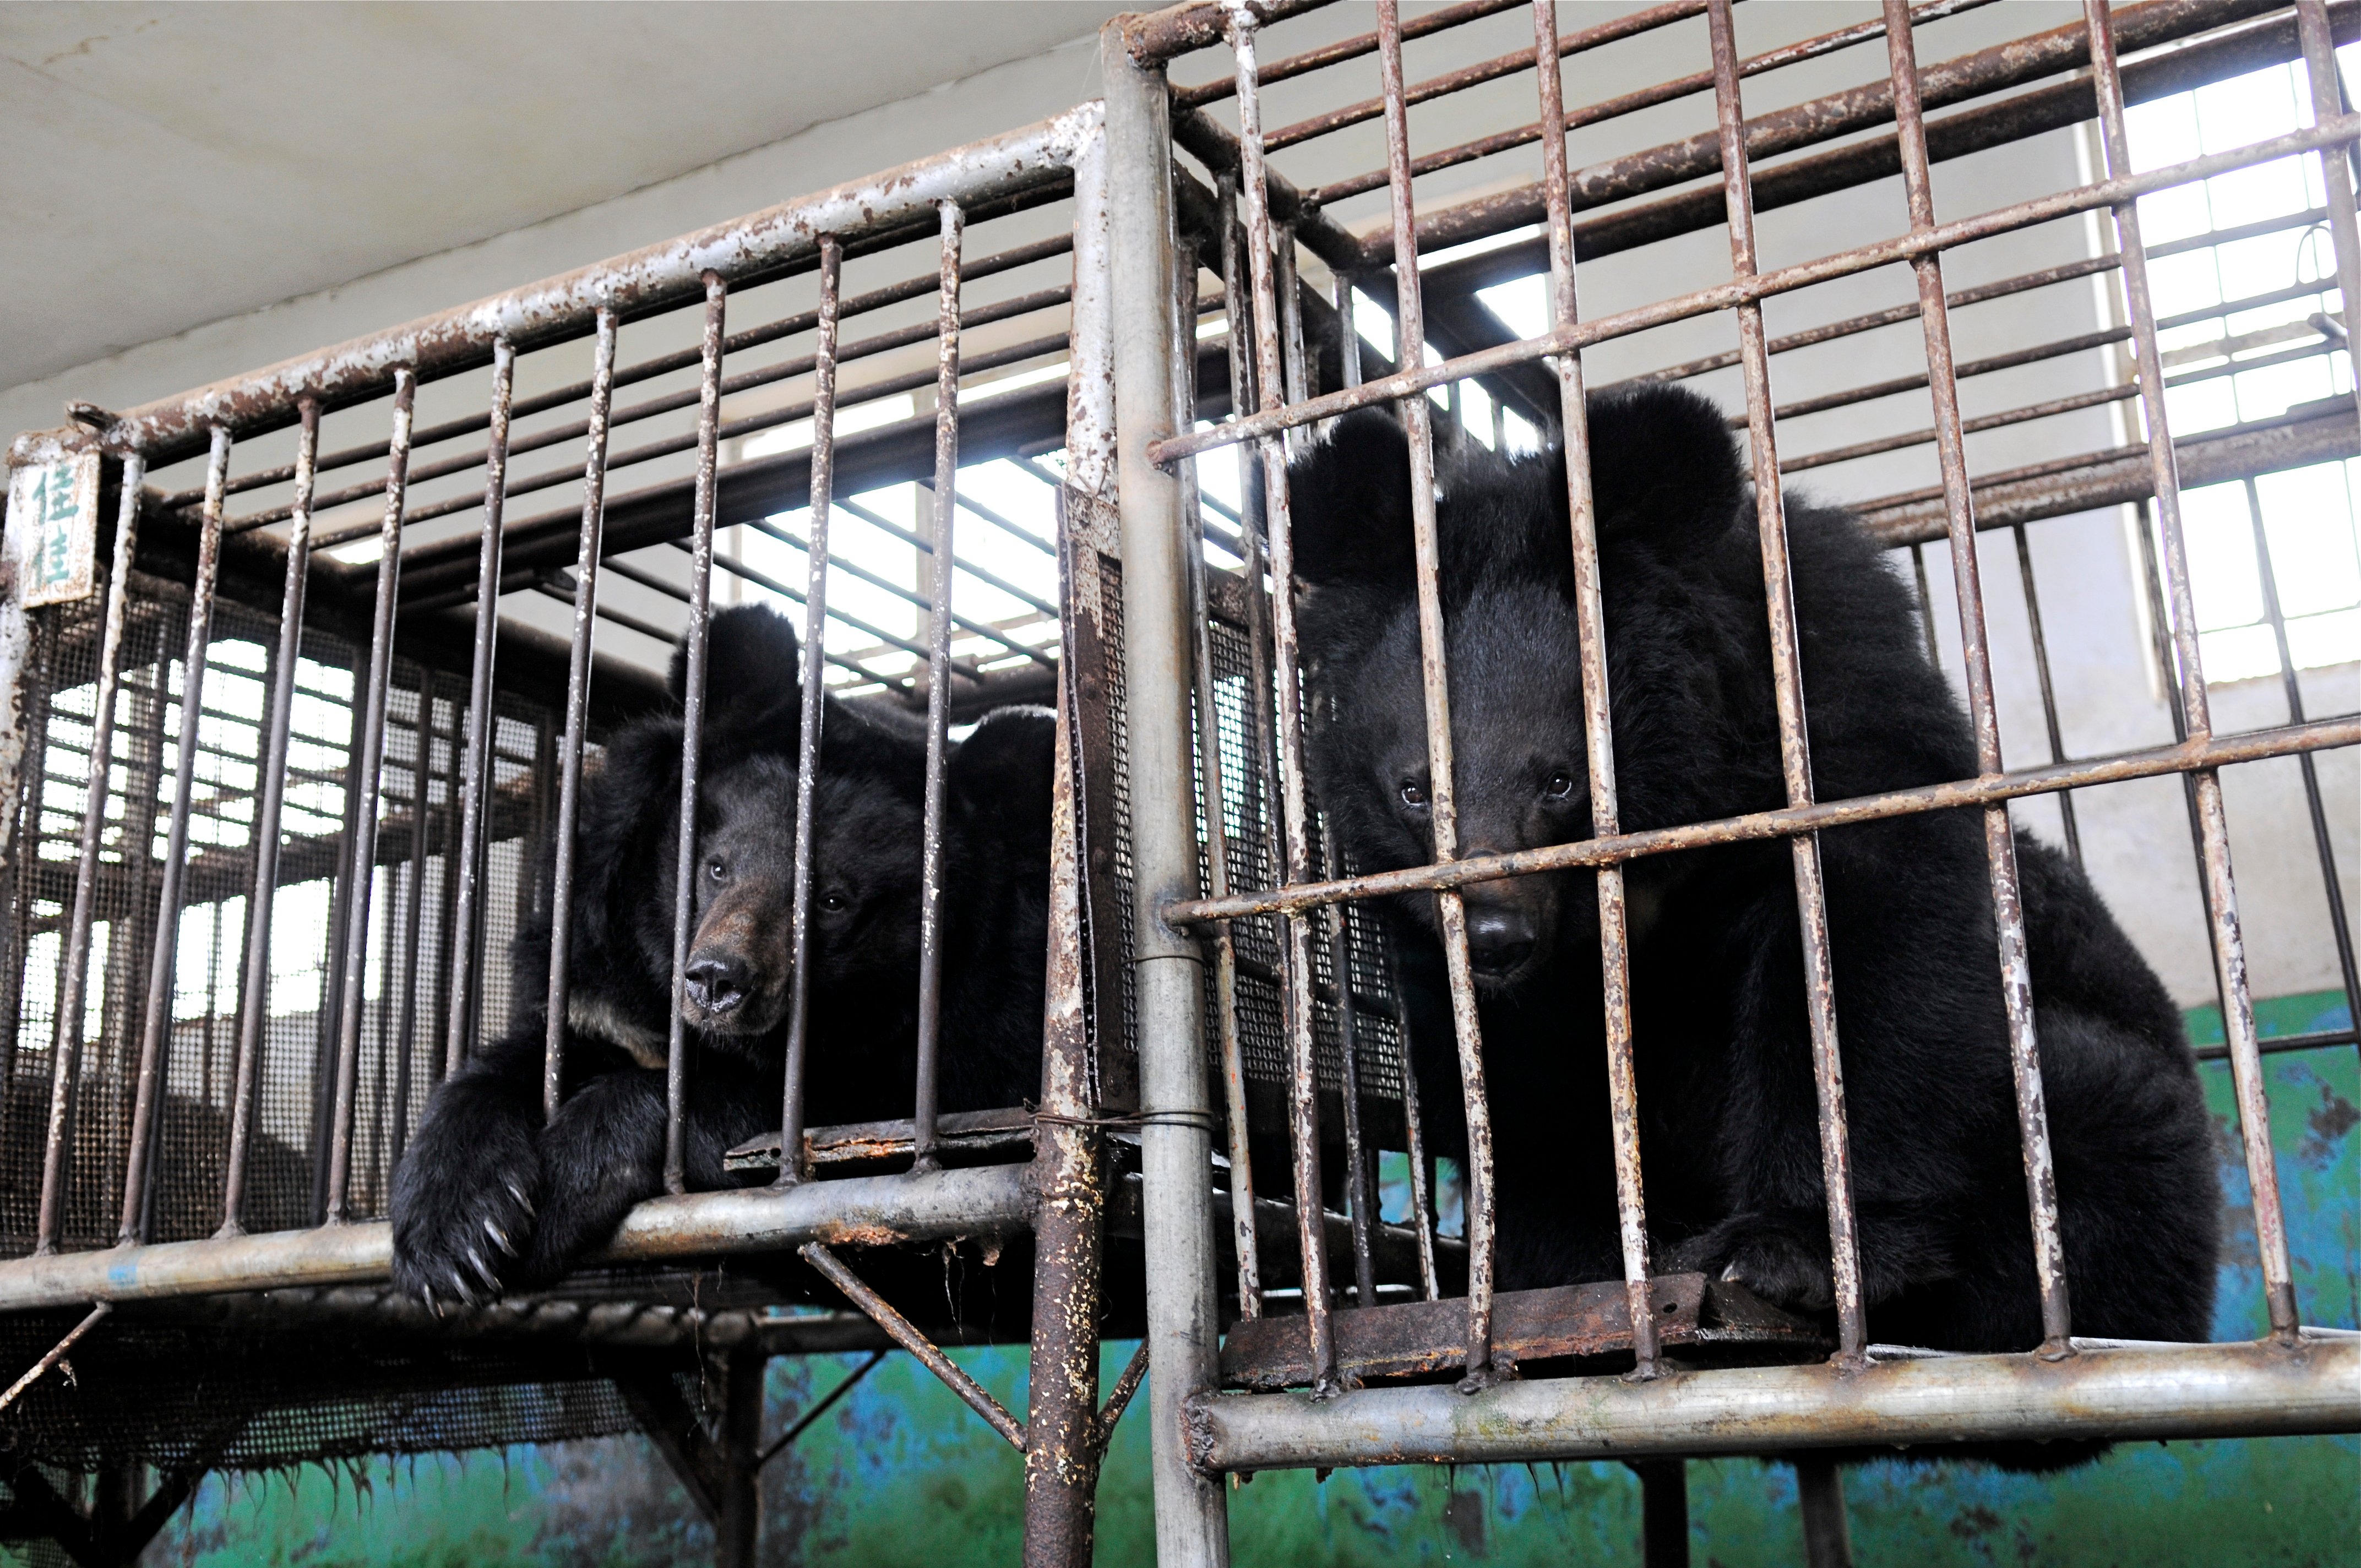 Caged bears in China